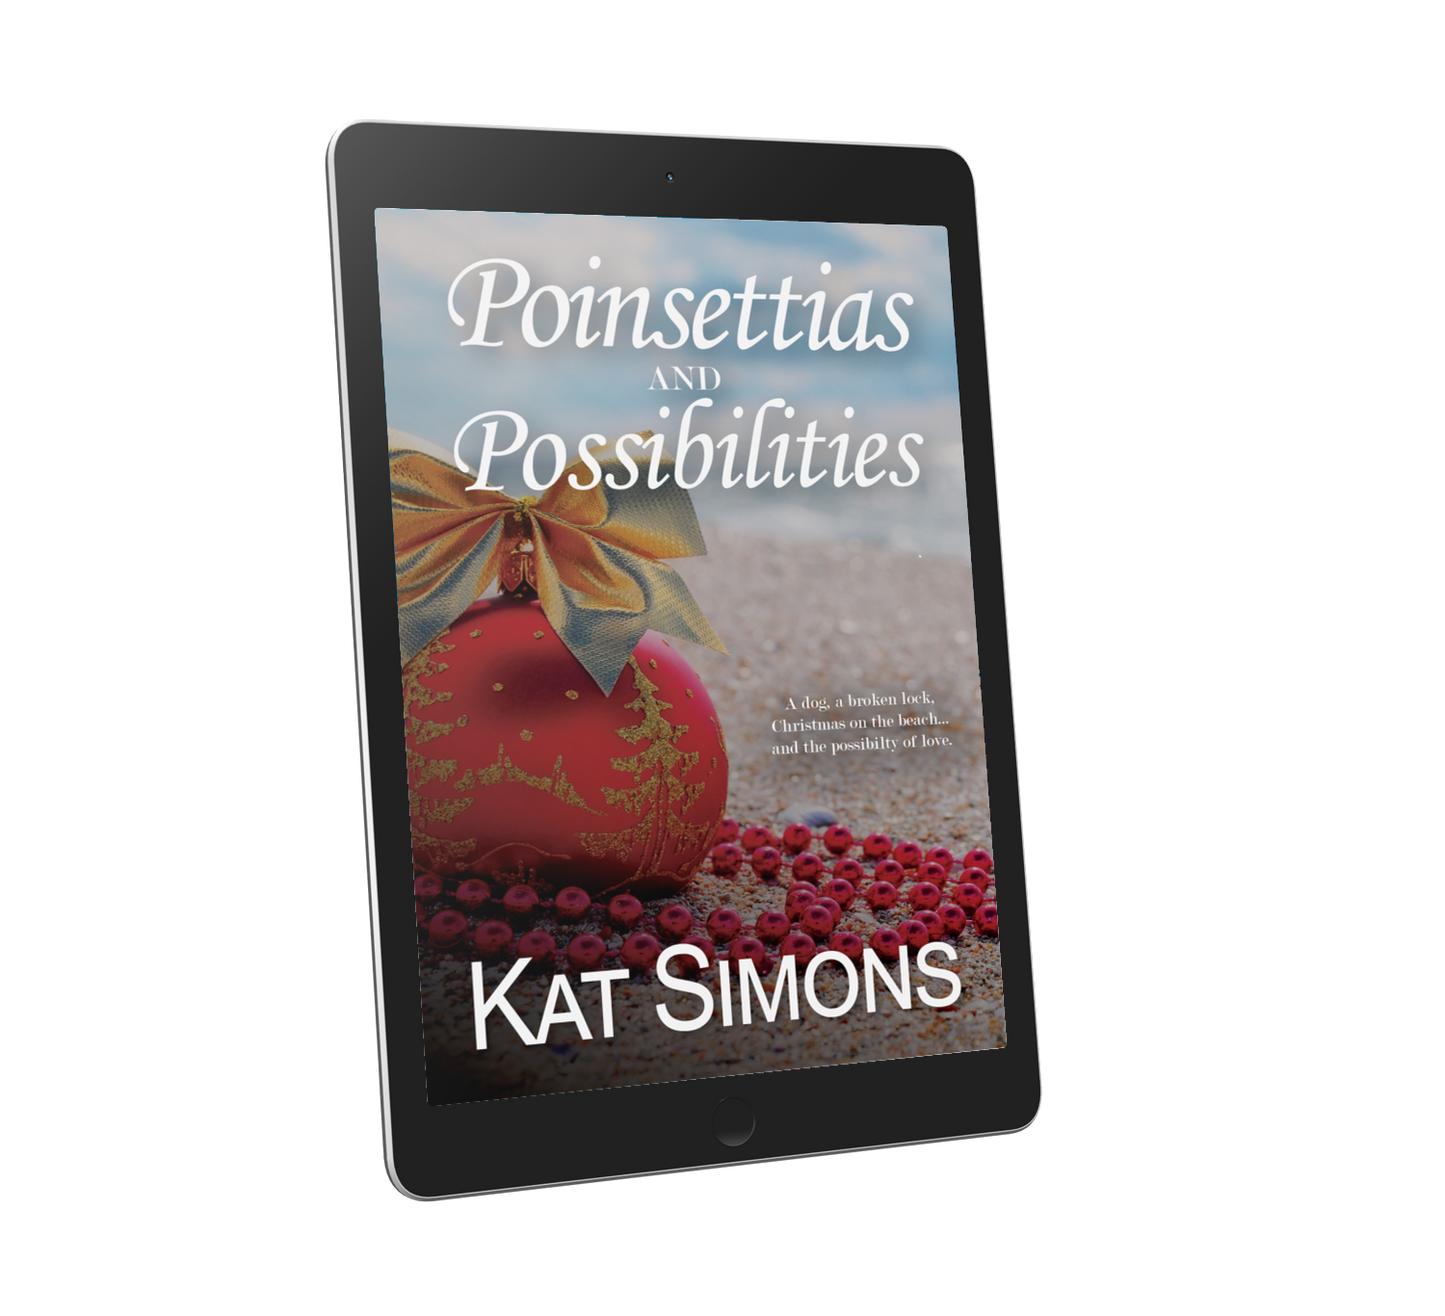 Poinsettias and Possibilities